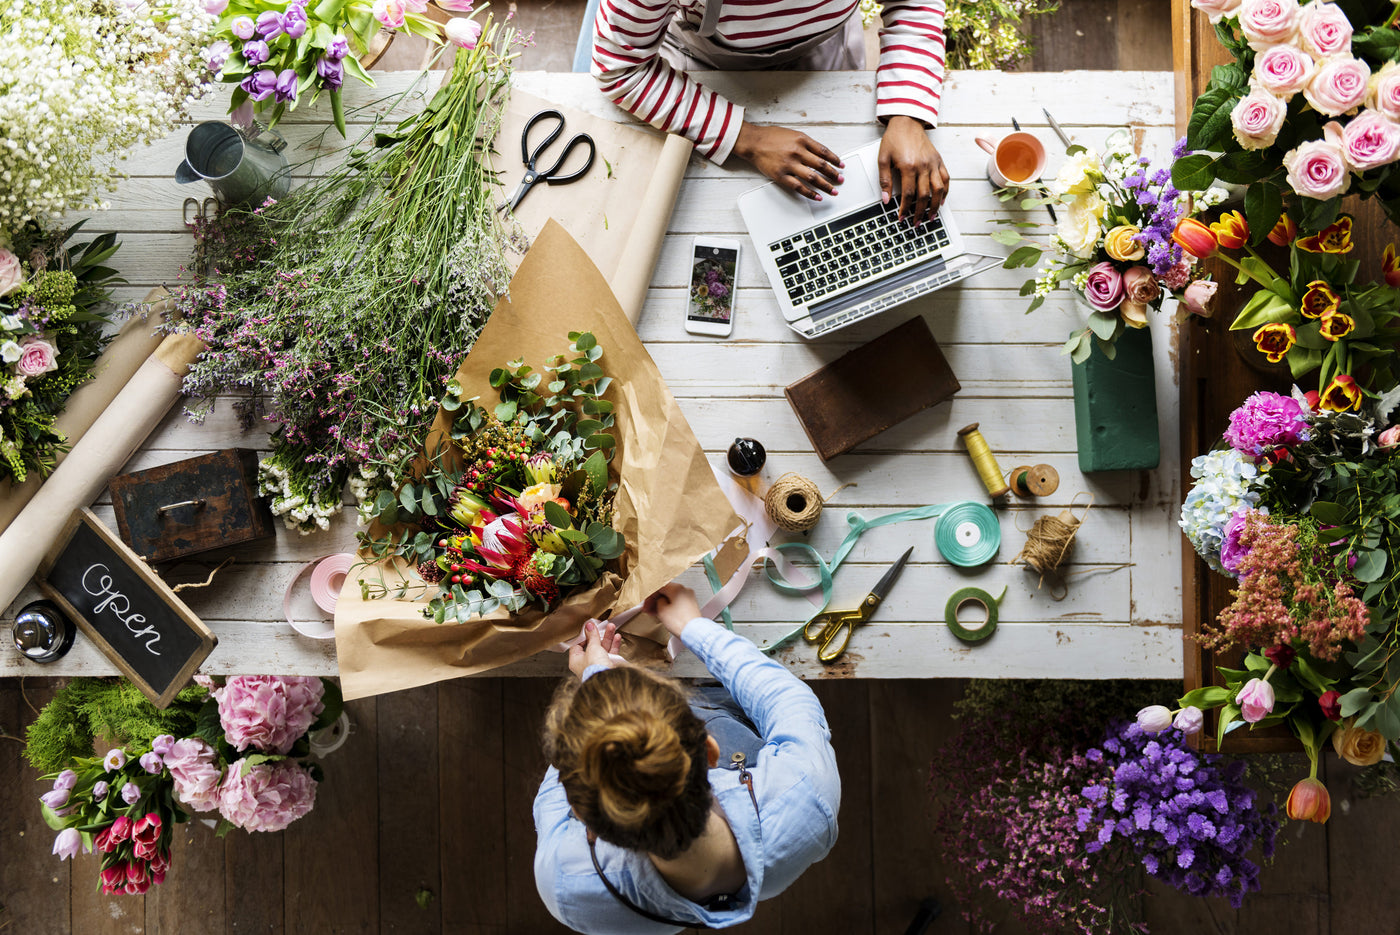 How to become a Flower Expert - Online Guide to Floristry Training